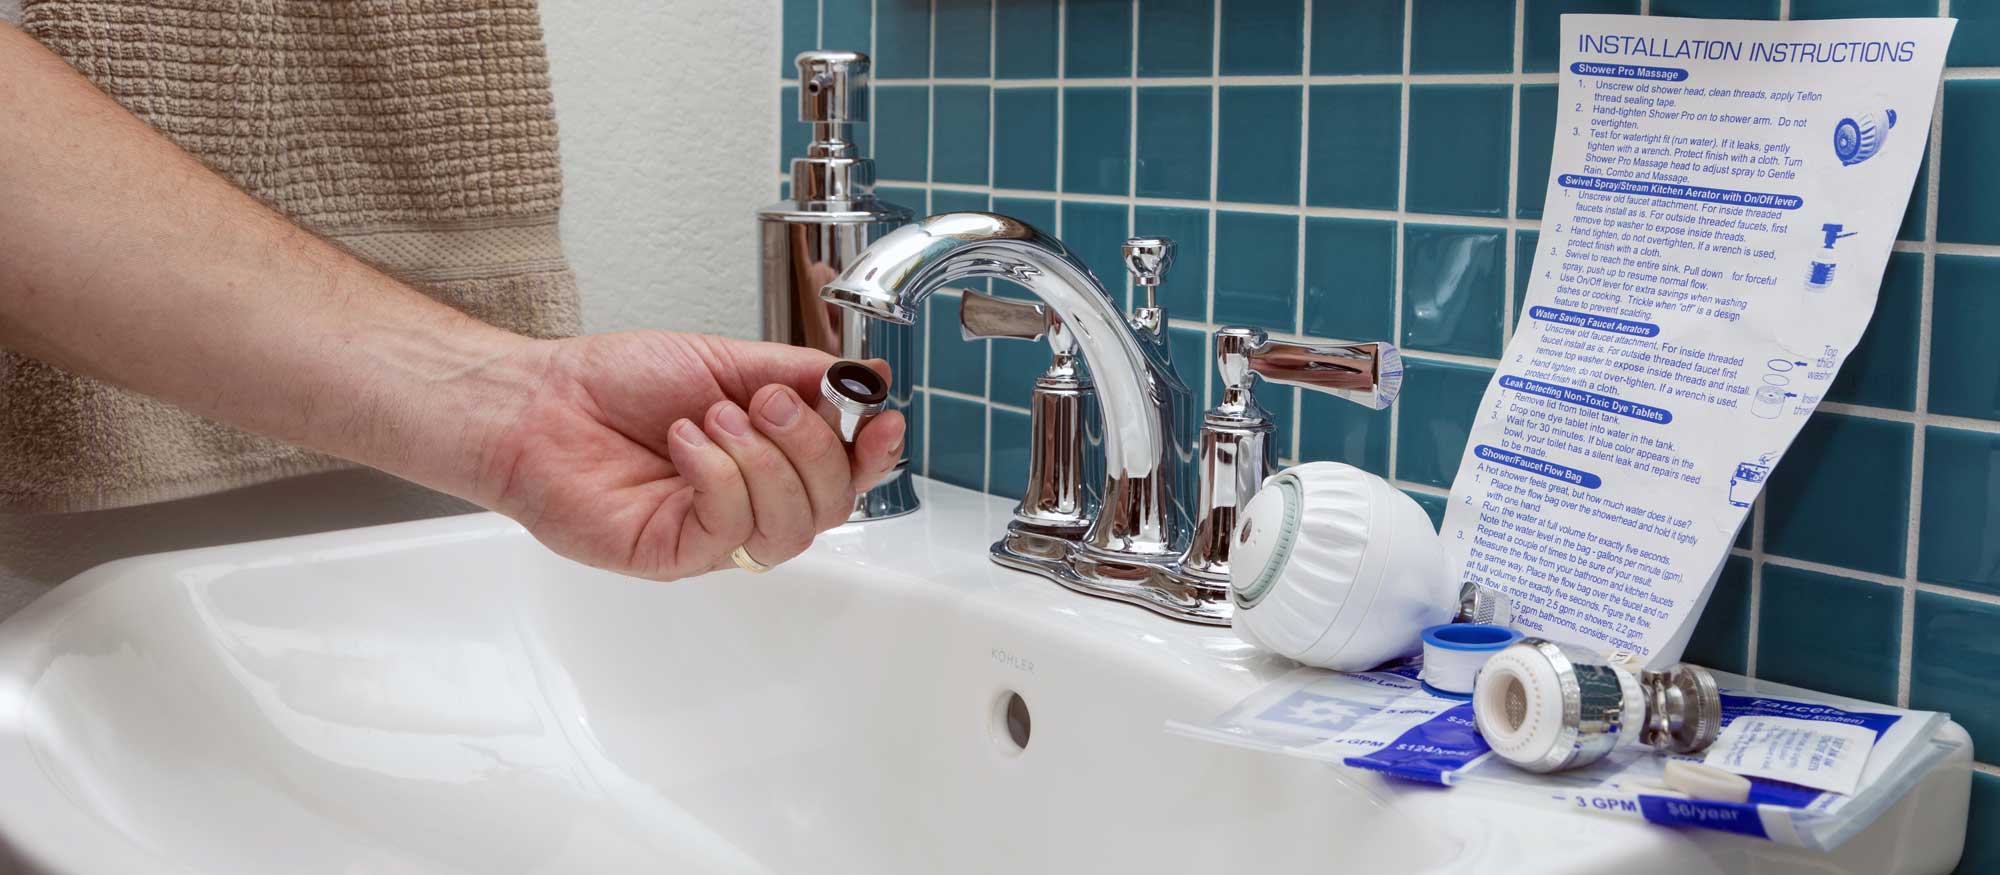 Close up of hand holding aerator with bathroom sink and Water Audit Kit in background